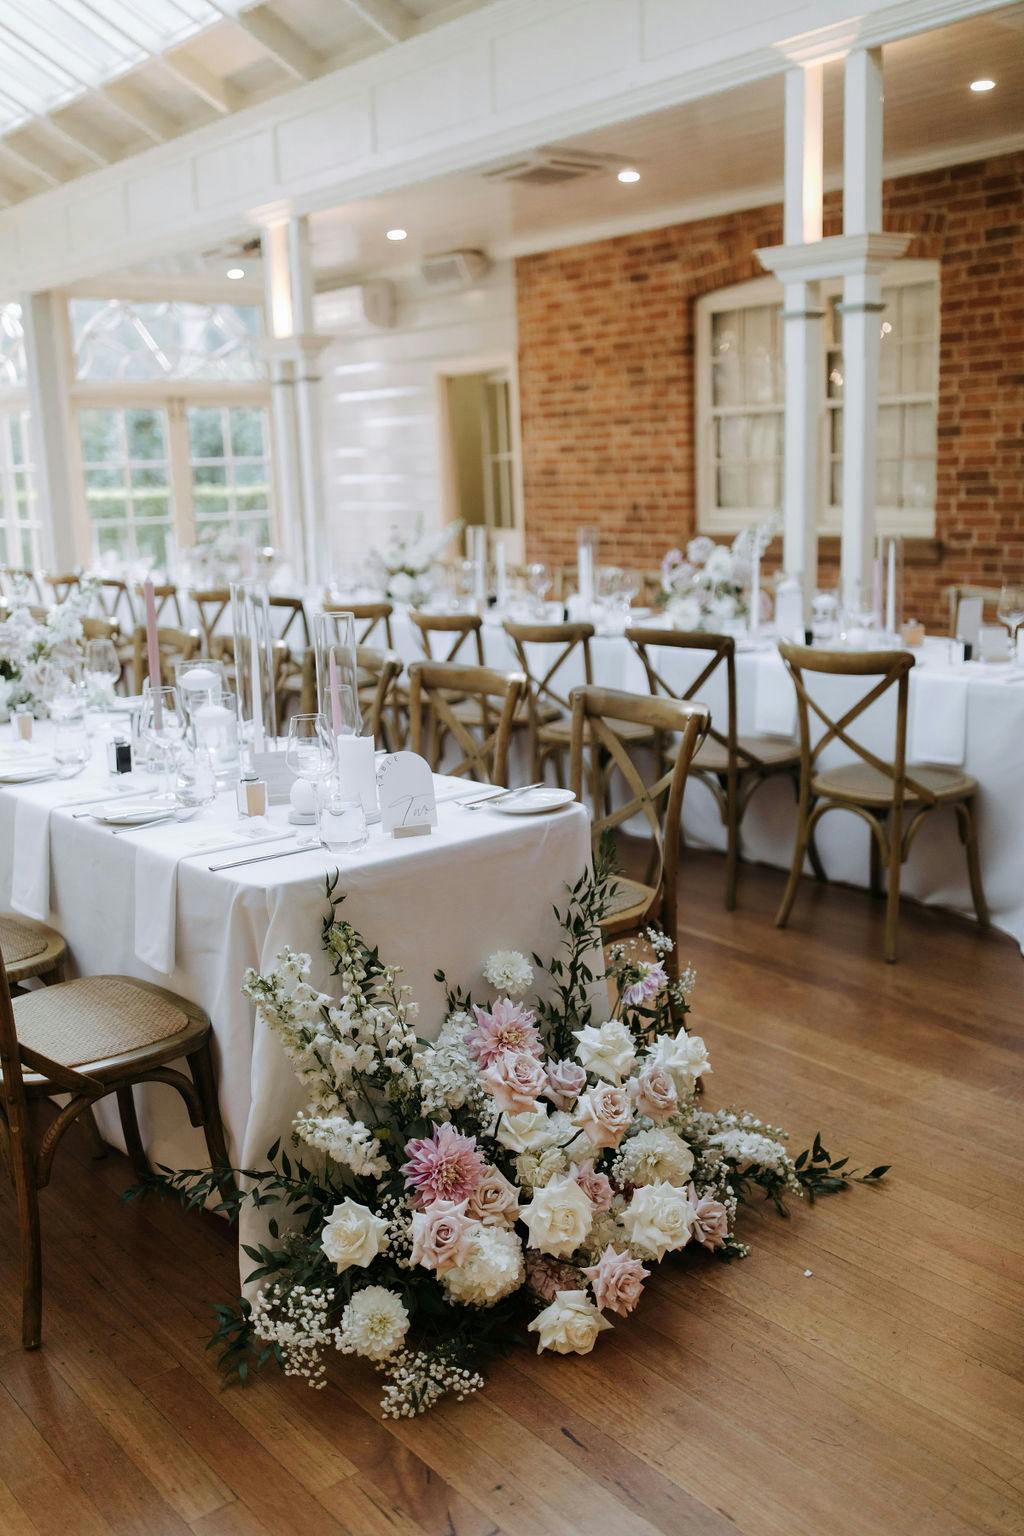 A beautifully decorated wedding reception room features a long table with white linens, set with glassware, white plates, and tall clear vases with candles. A floral arrangement of pink and white flowers with greenery sits at the end of the table.